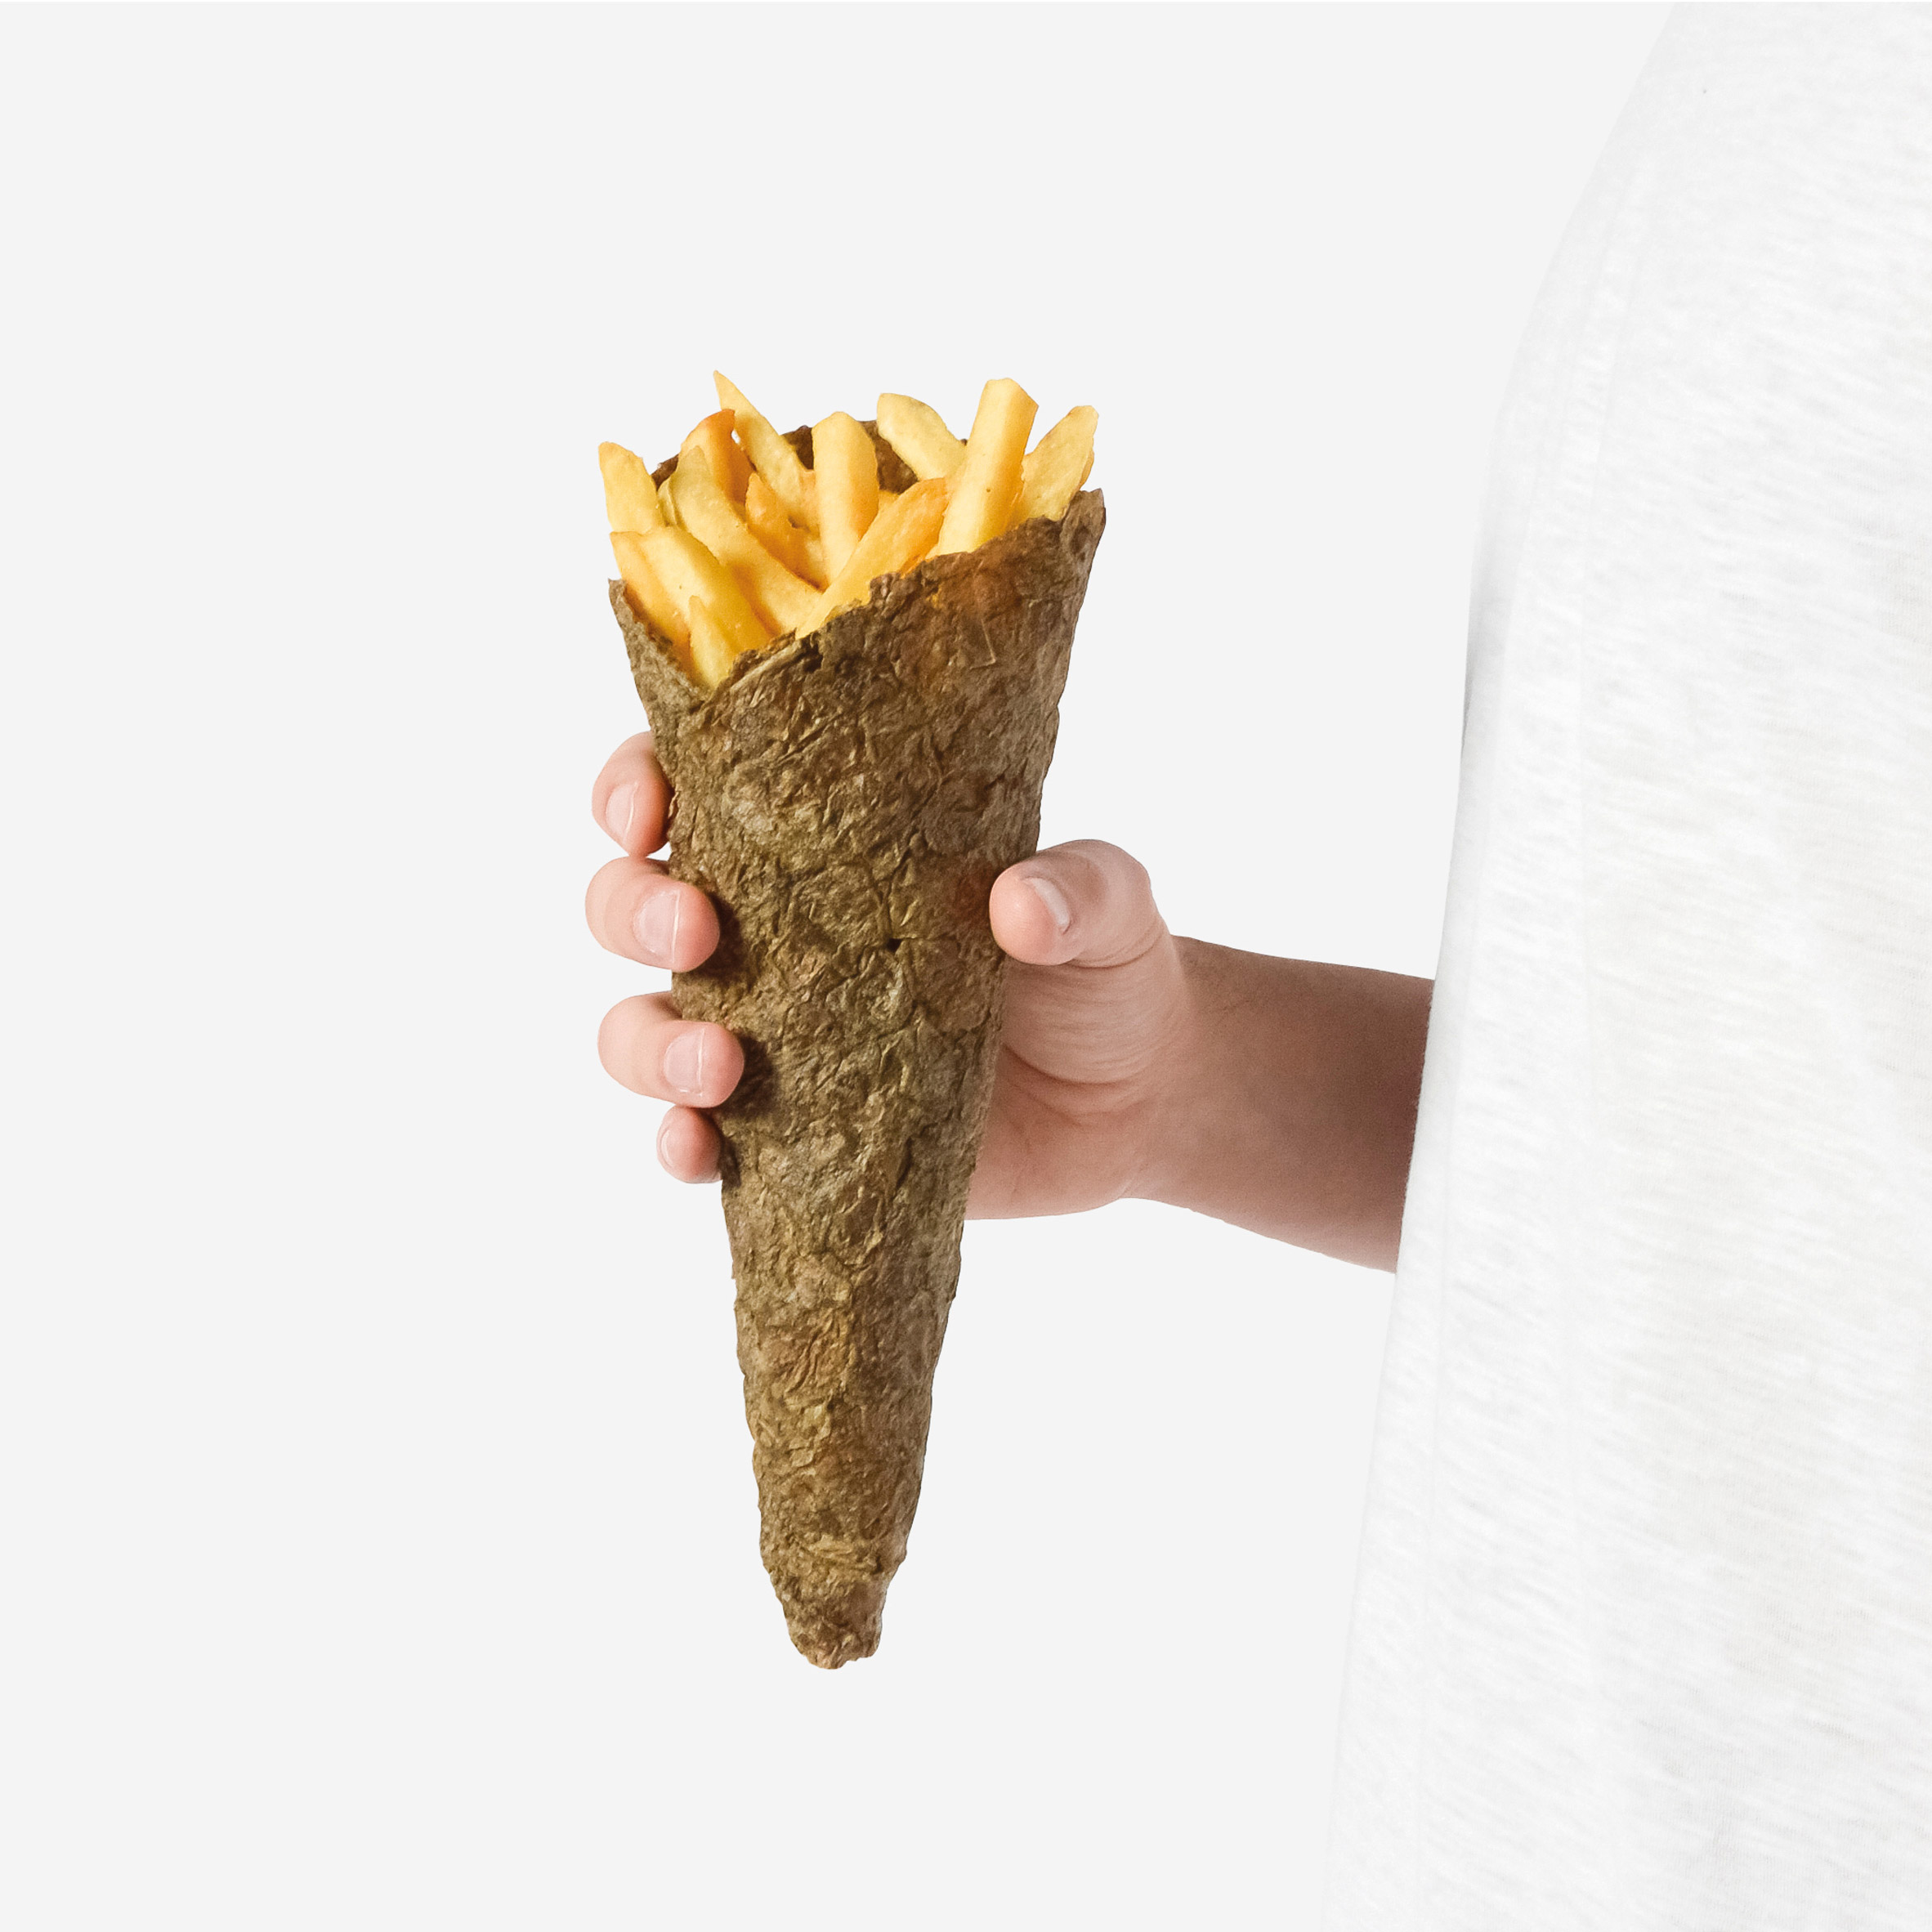 creative french fries packaging